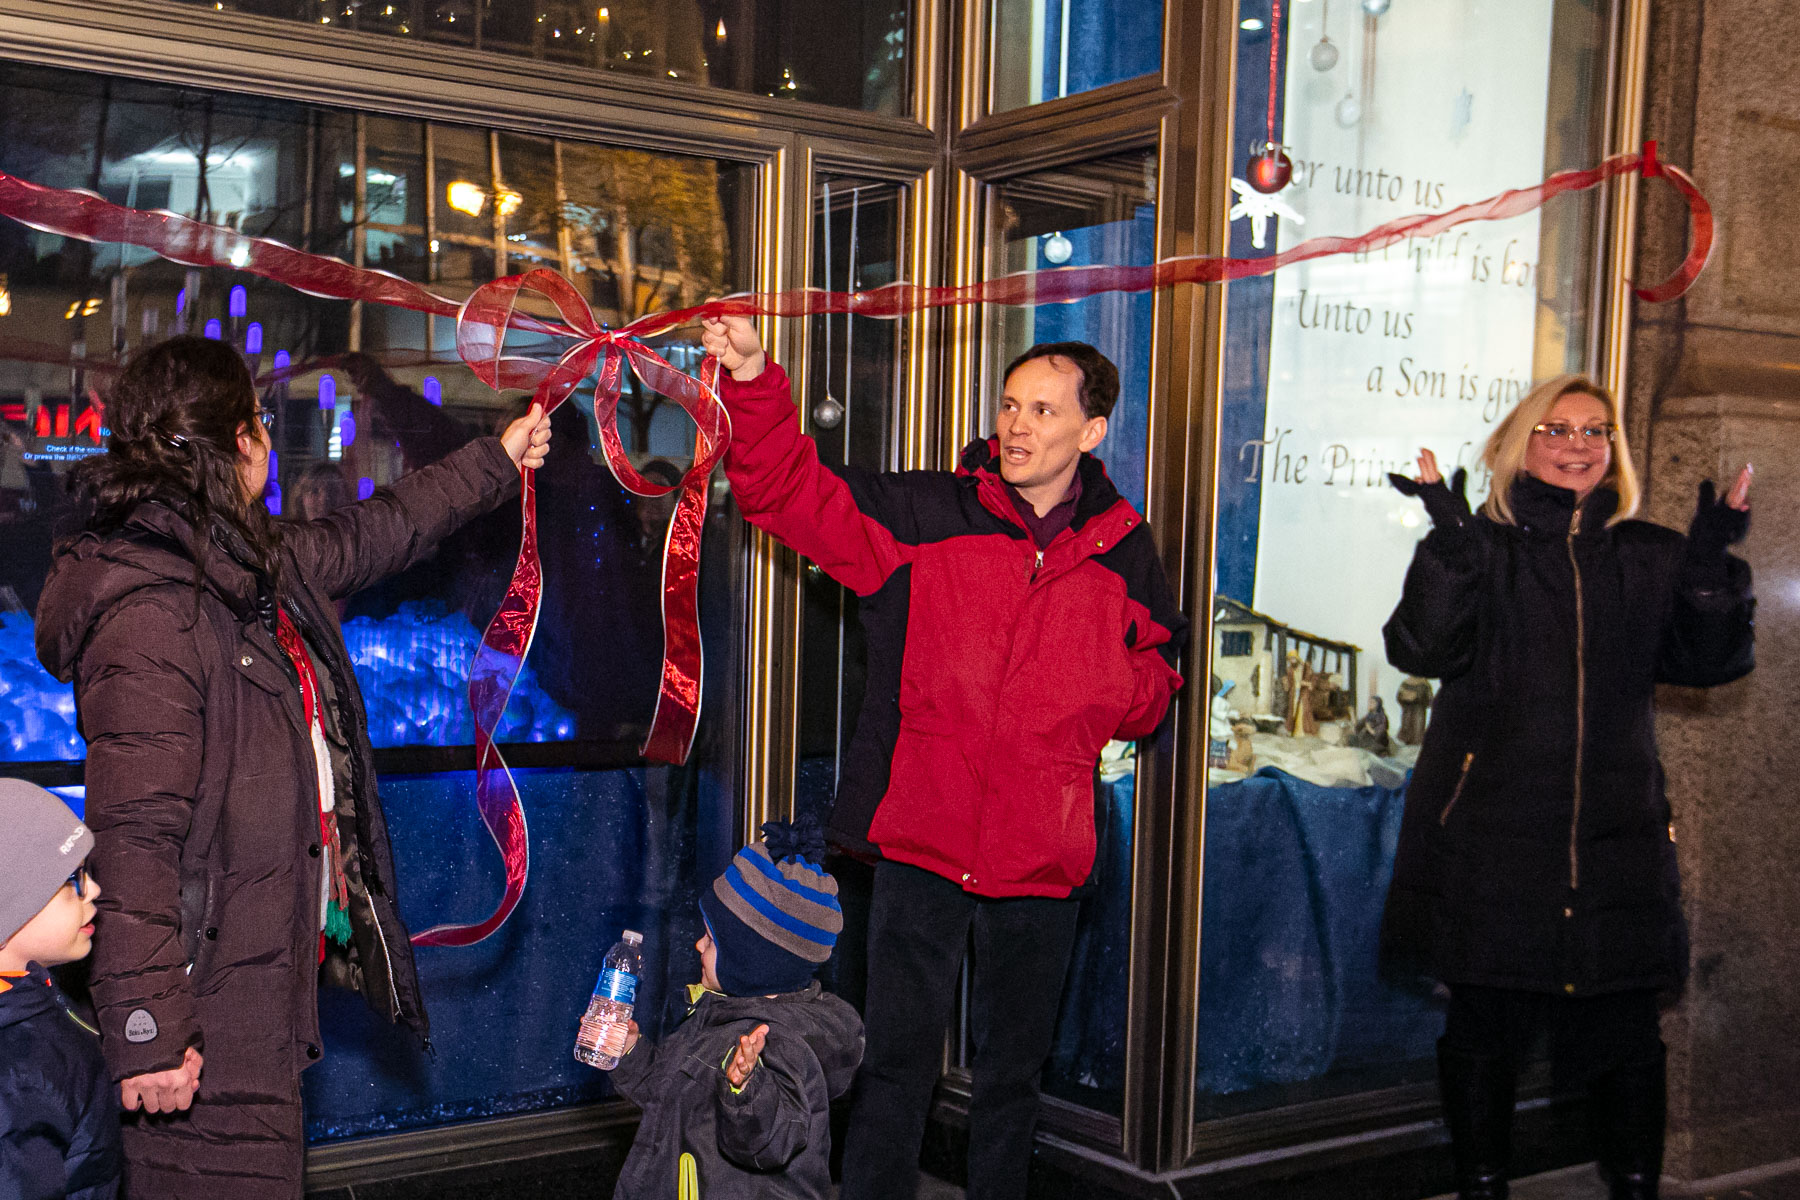 Left to right, Meghann Artes, Devin Bell and JoAnne Zielinski unveil the “Merry Christmas from DePaul” film and window display. A new tradition for DePaul, the display builds on the history of magical holiday windows along State Street for more than 100 years. (DePaul University/Randall Spriggs)